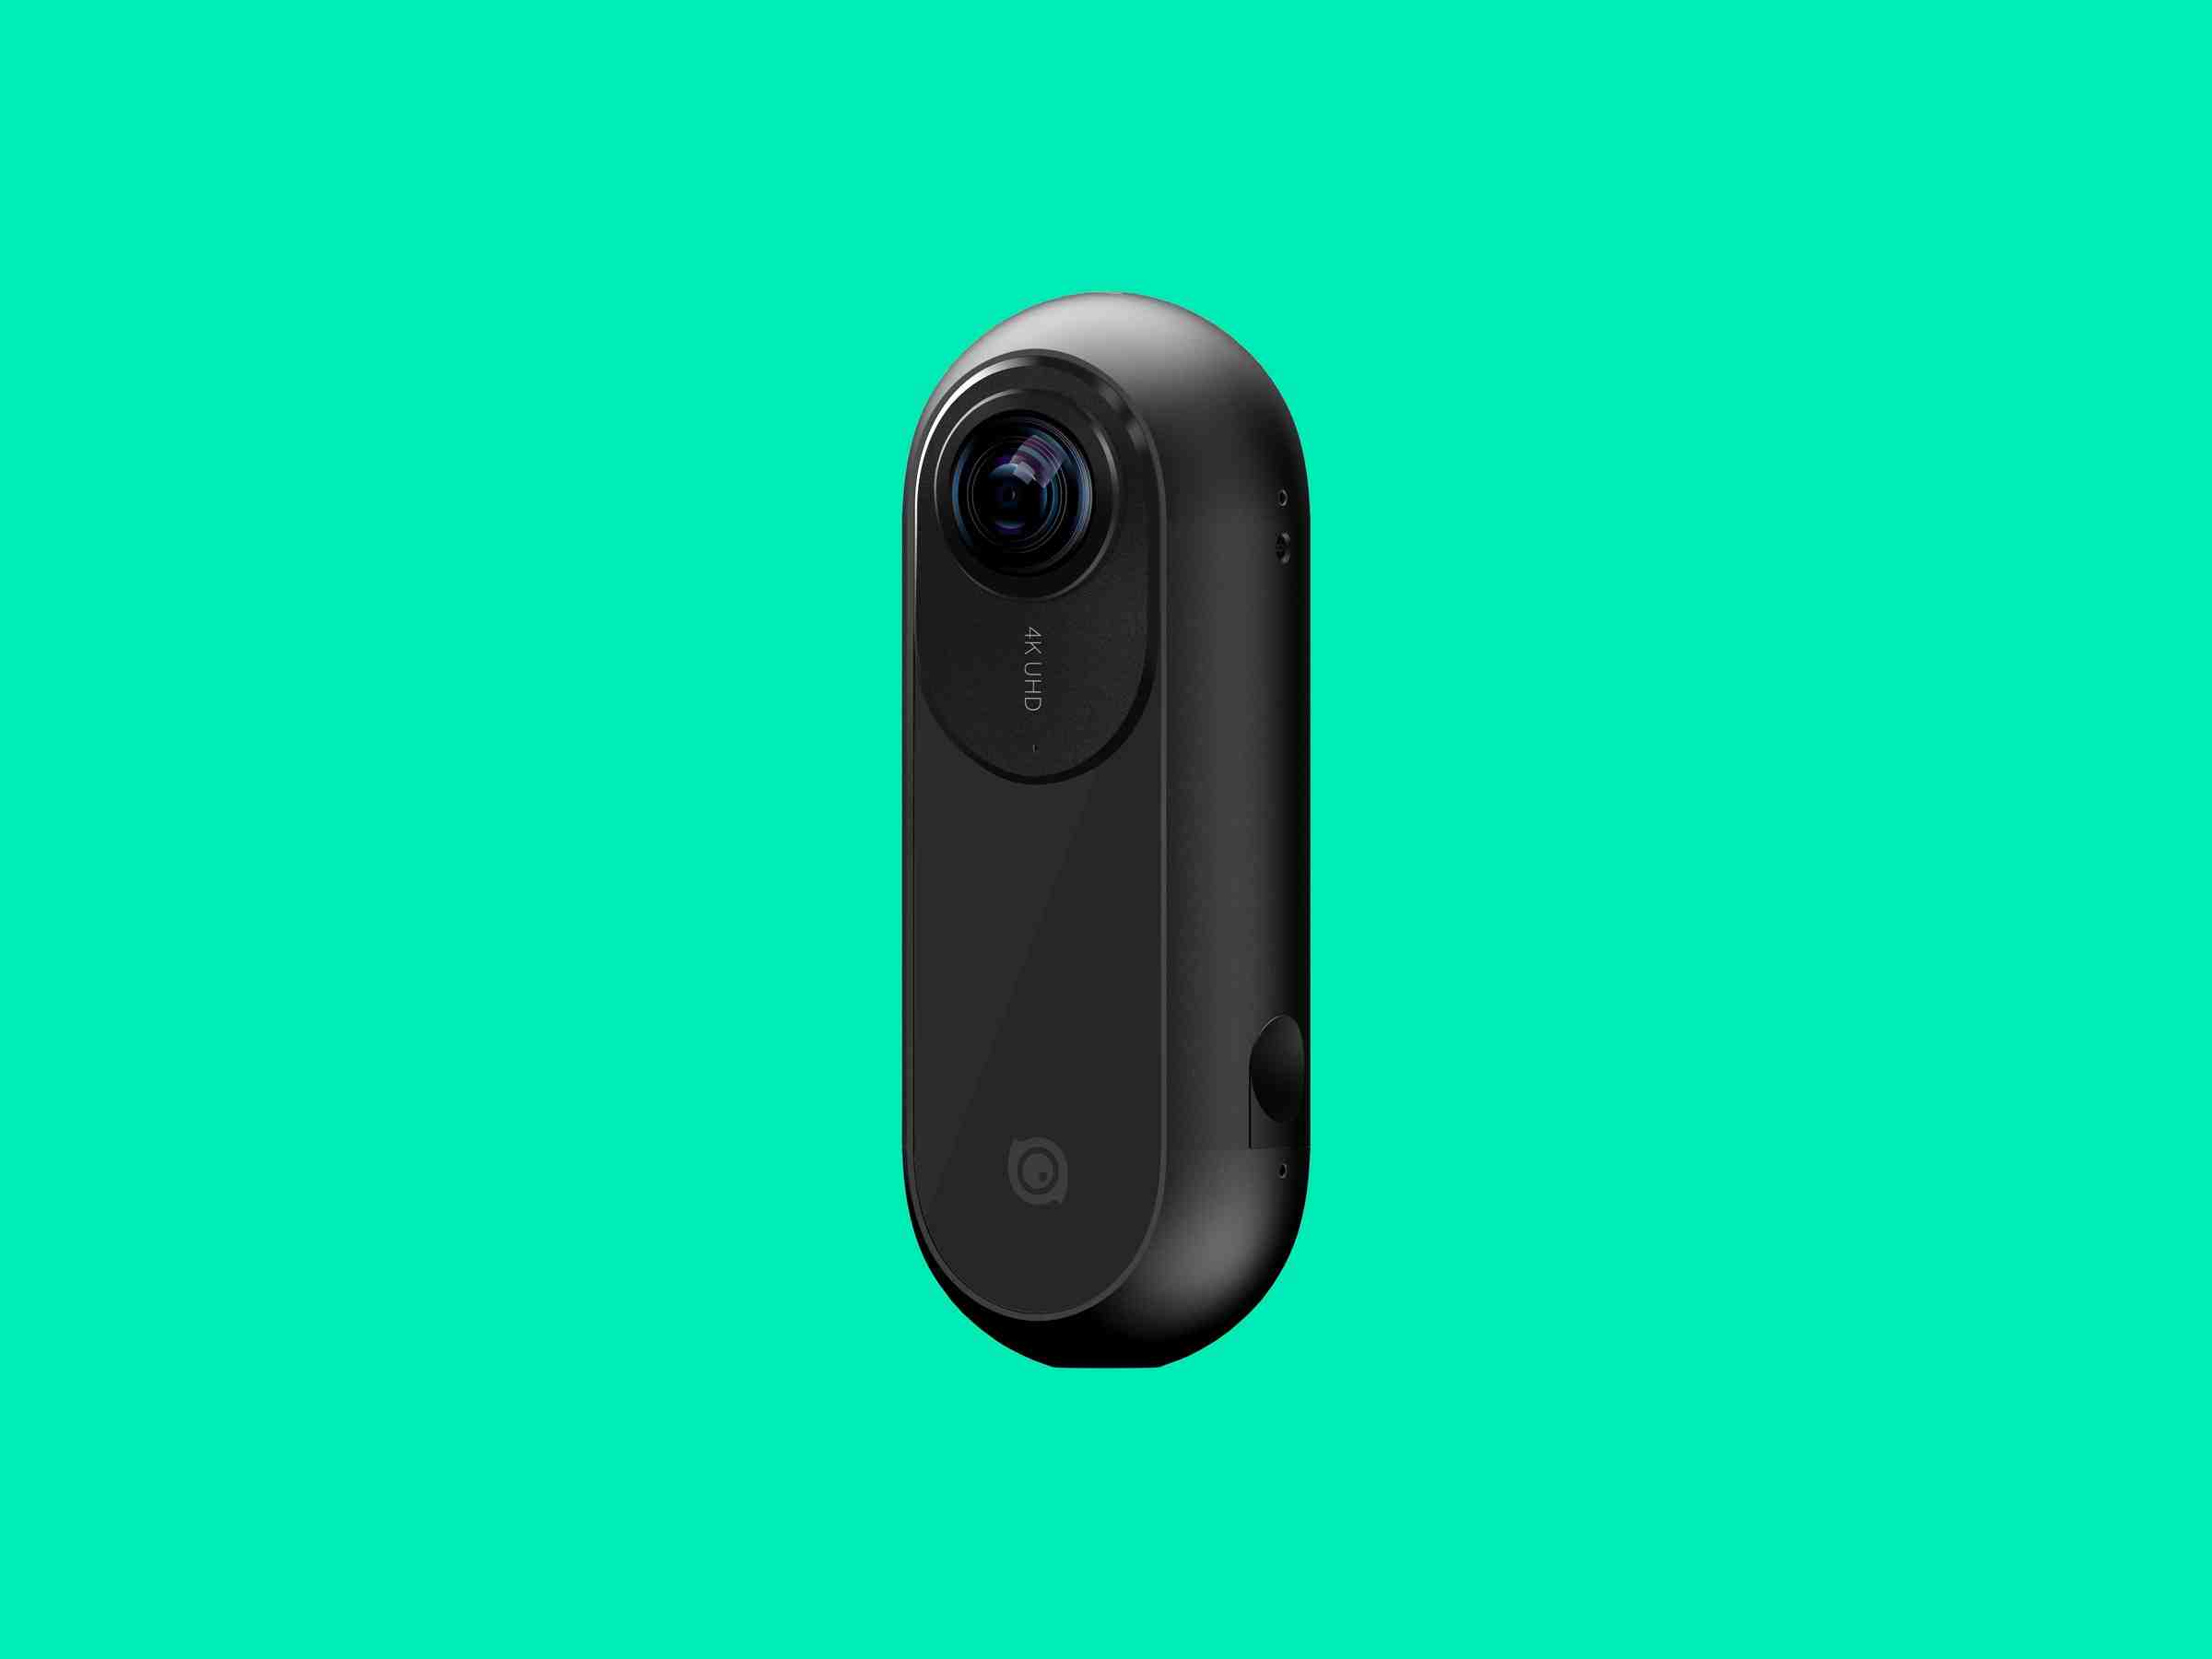 Can you live stream with a 360 camera?